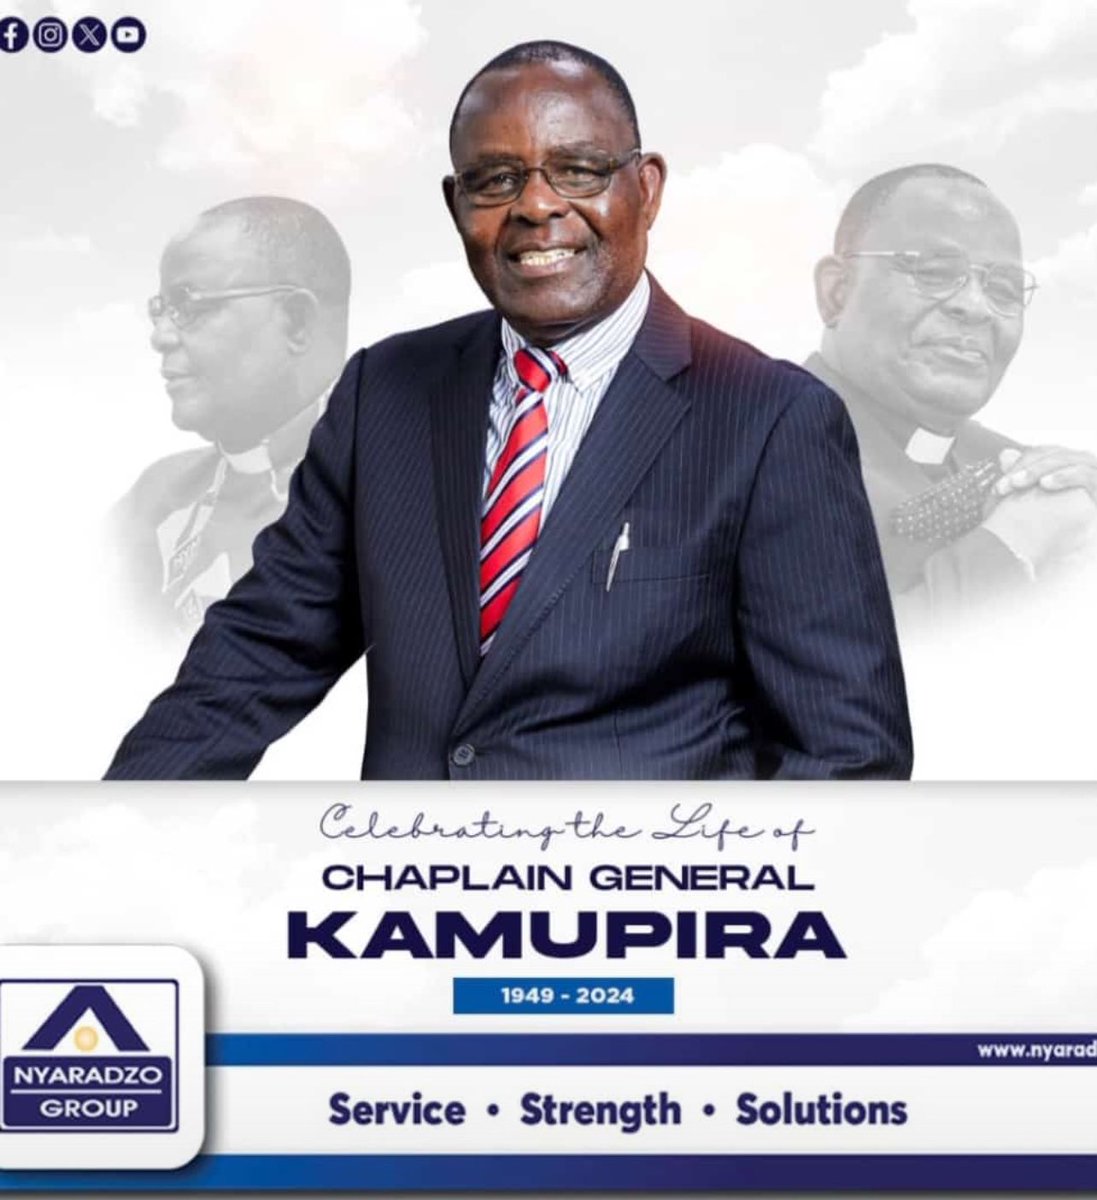 Rest in Peace Chaplain Kamupira 🙏🏾 Your dedication, wisdom & service will forever be remembered.